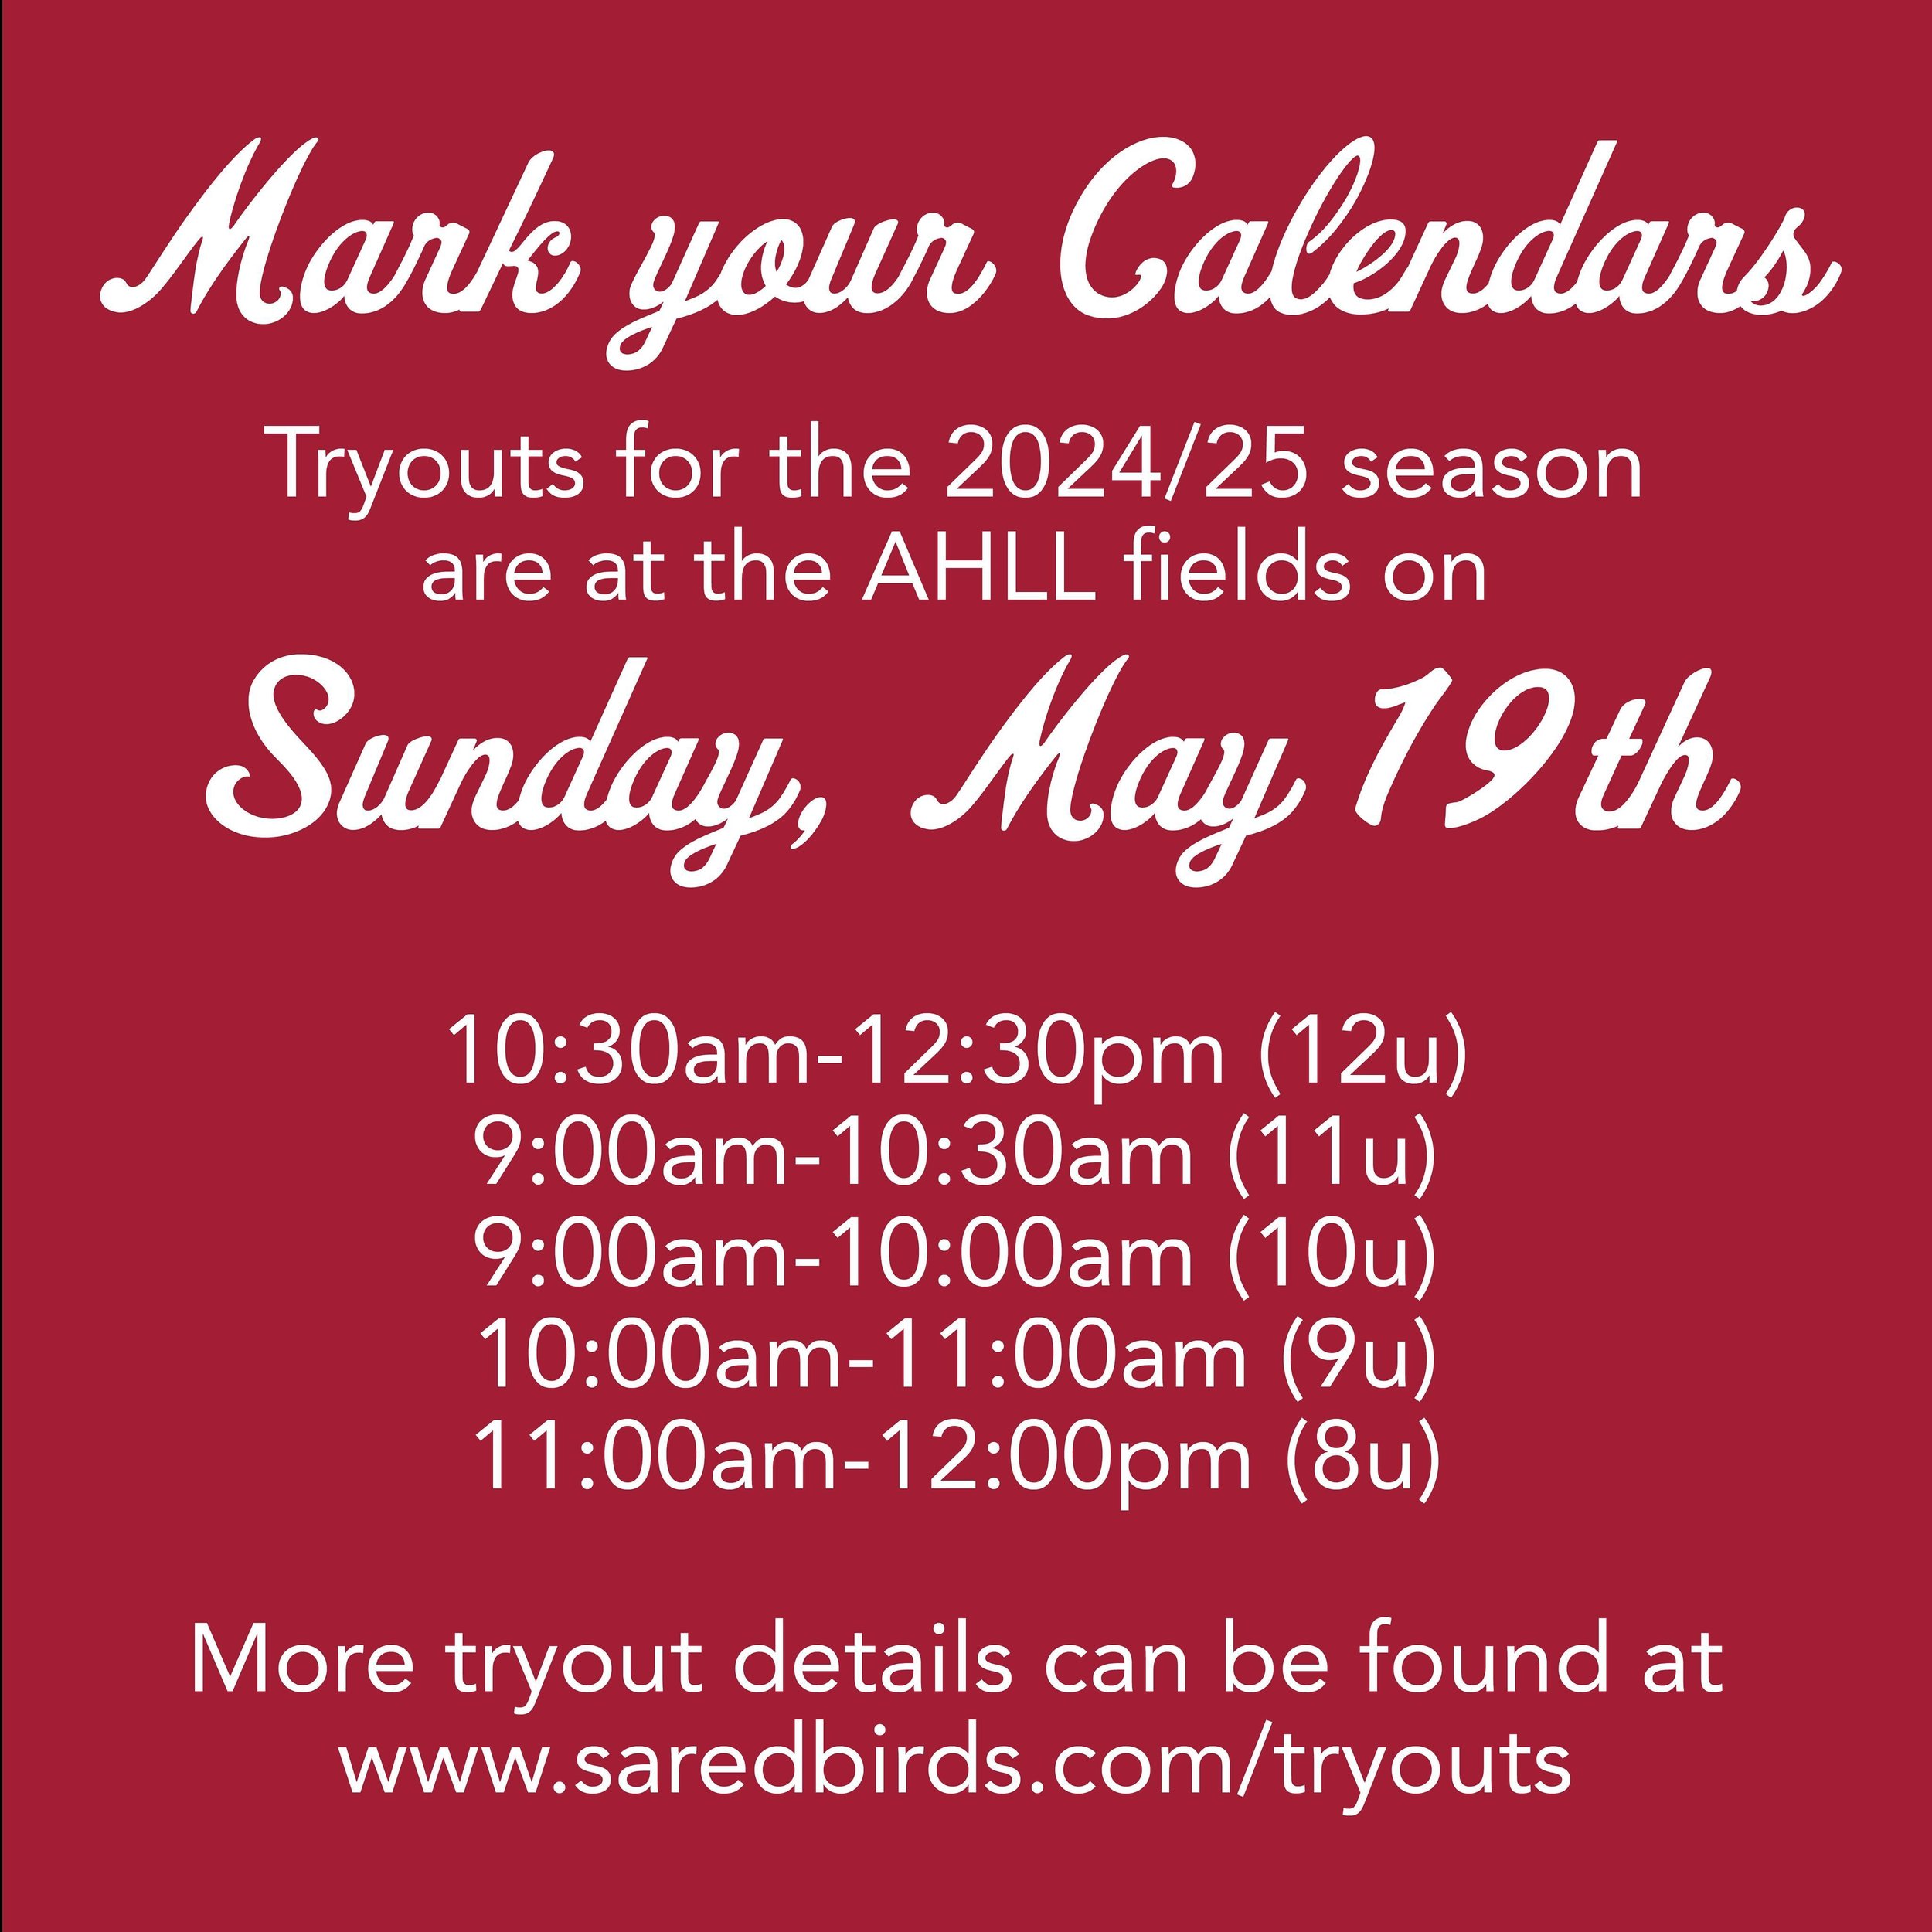 Mark your Calendars! Tryouts for the 2024/25 season are at the AHLL fields on Sunday, May 19th.

10:30am-12:30pm (12u)
9:00am-10:30am (11u)
9:00am-10:00am (10u)
10:00am-11:00am (9u)
11:00am-12:00pm (8u)

More tryout details (including what to wear, b